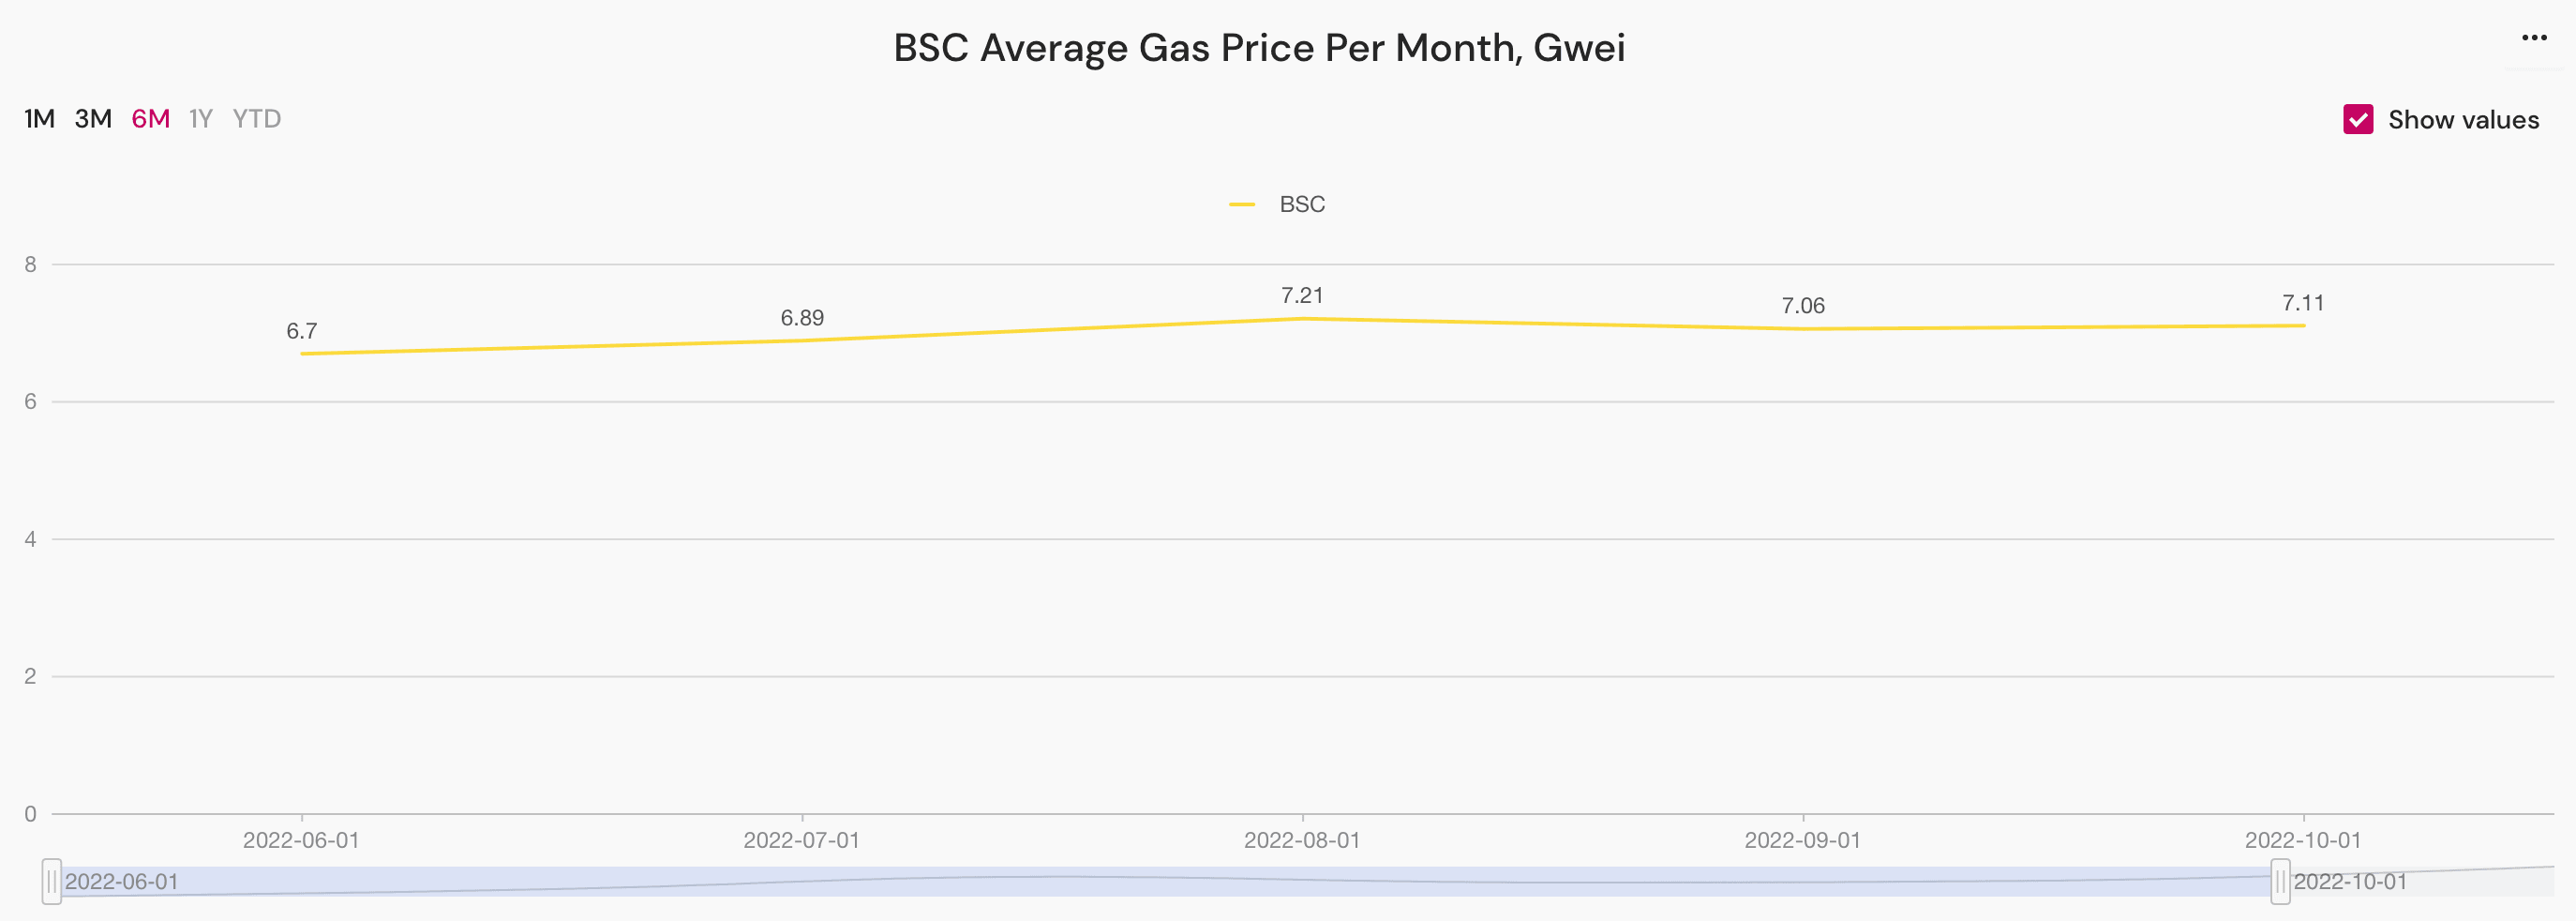 BSC Average Gas Price Per Month